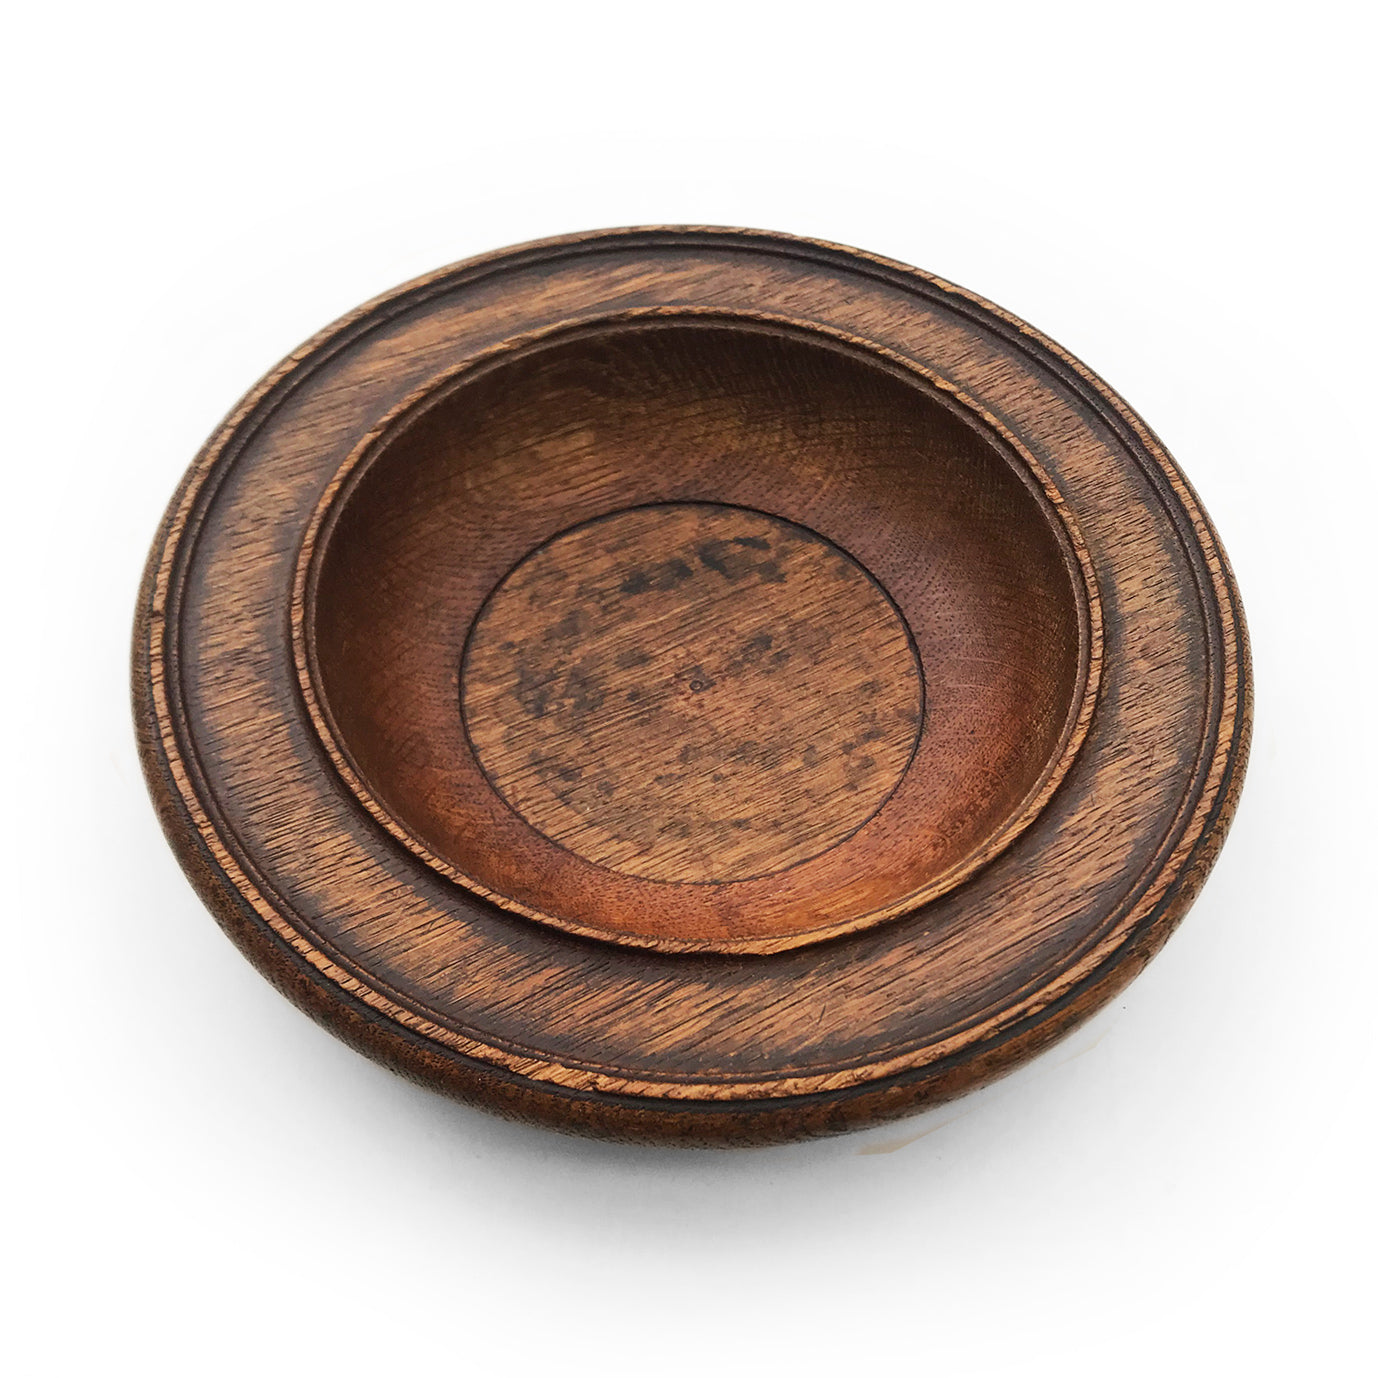 Solid oak church collection plate C.1930 - BUY NOW - www.intovintage.co.uk